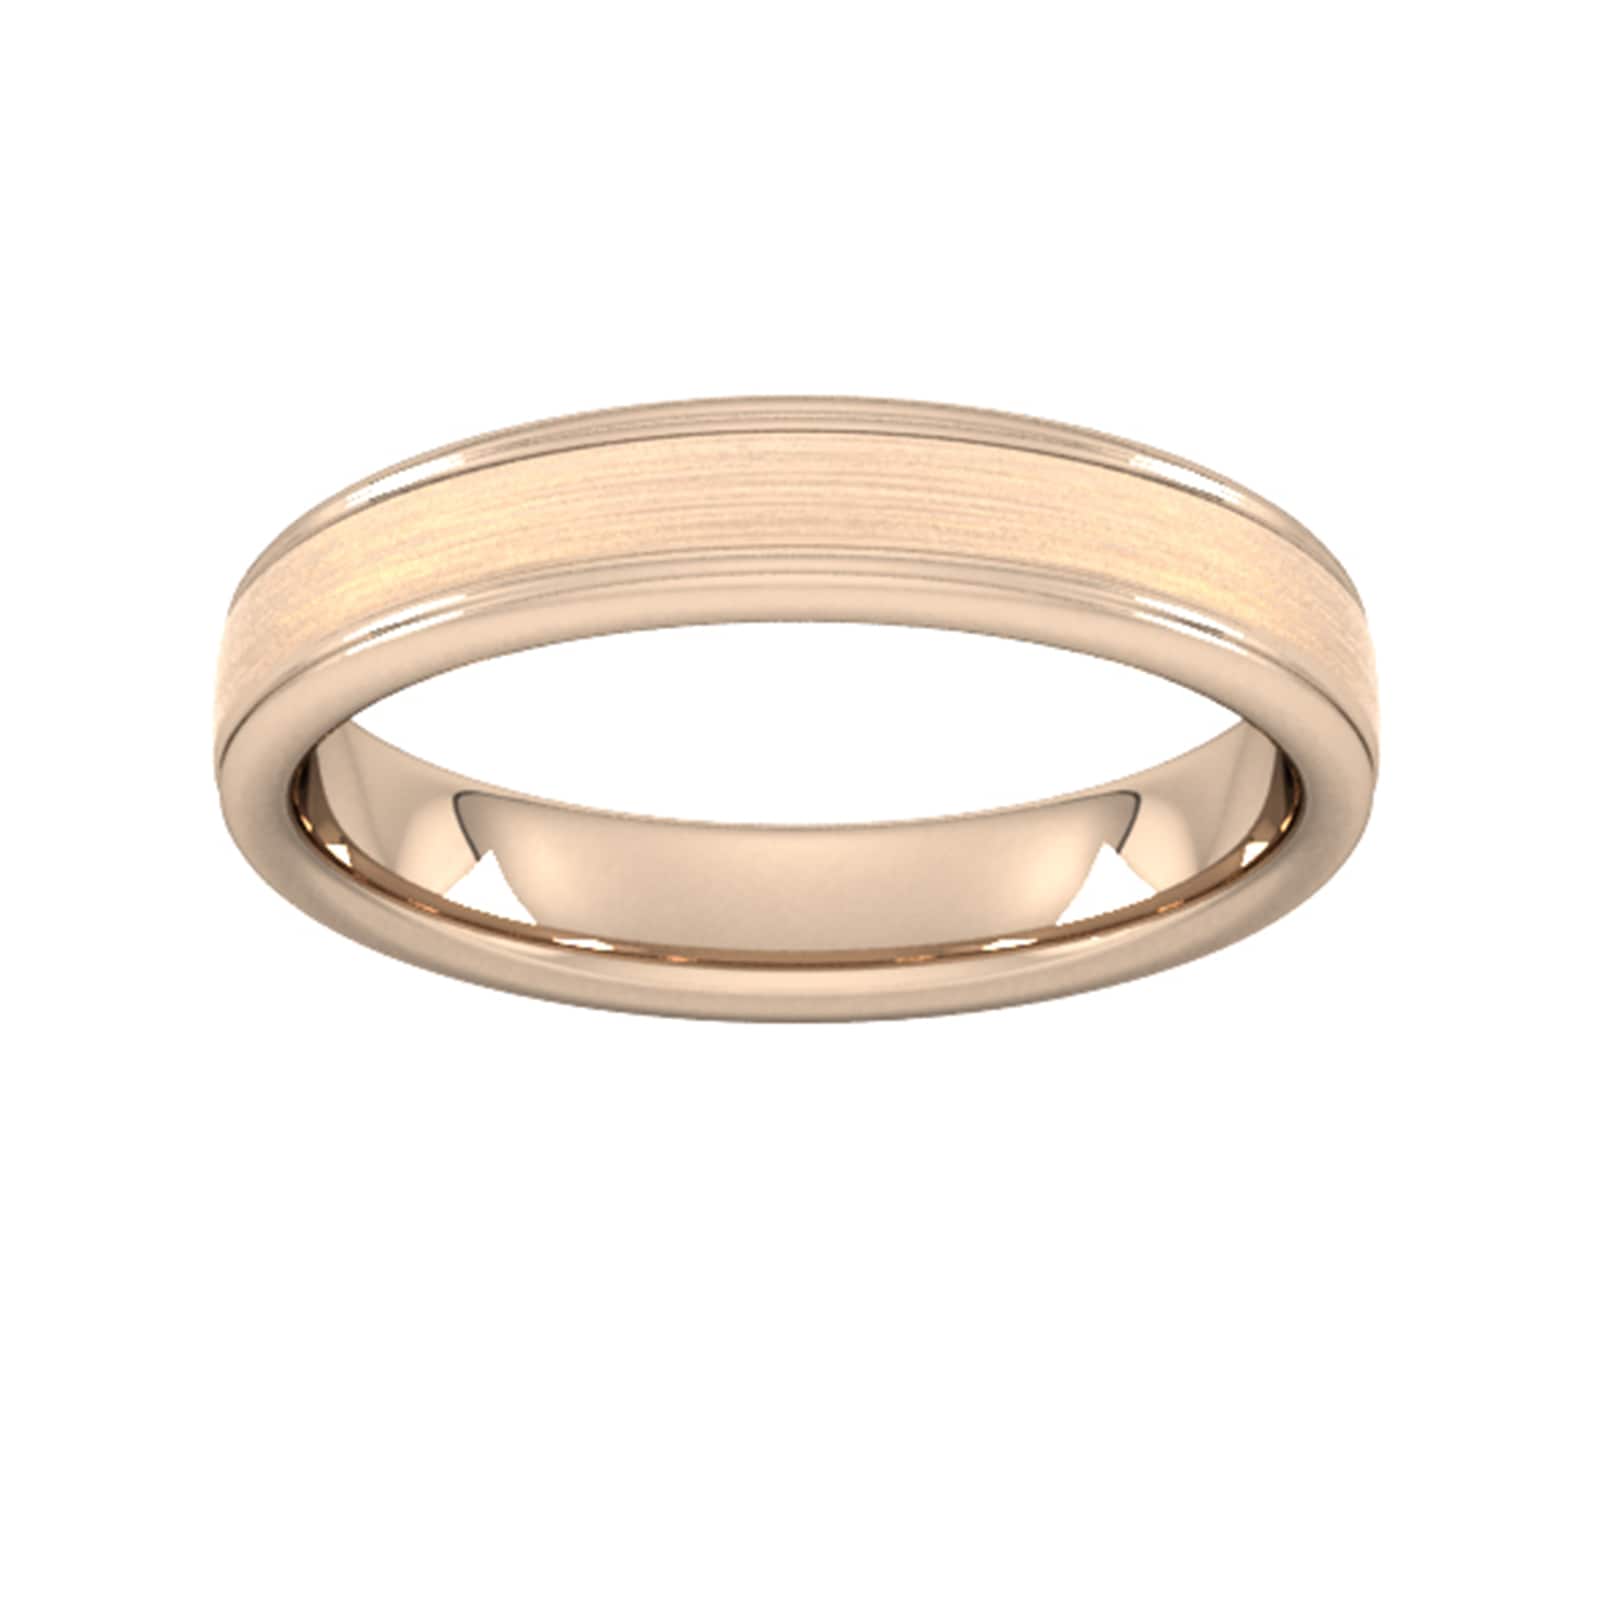 4mm D Shape Heavy Matt Centre With Grooves Wedding Ring In 9 Carat Rose Gold - Ring Size K